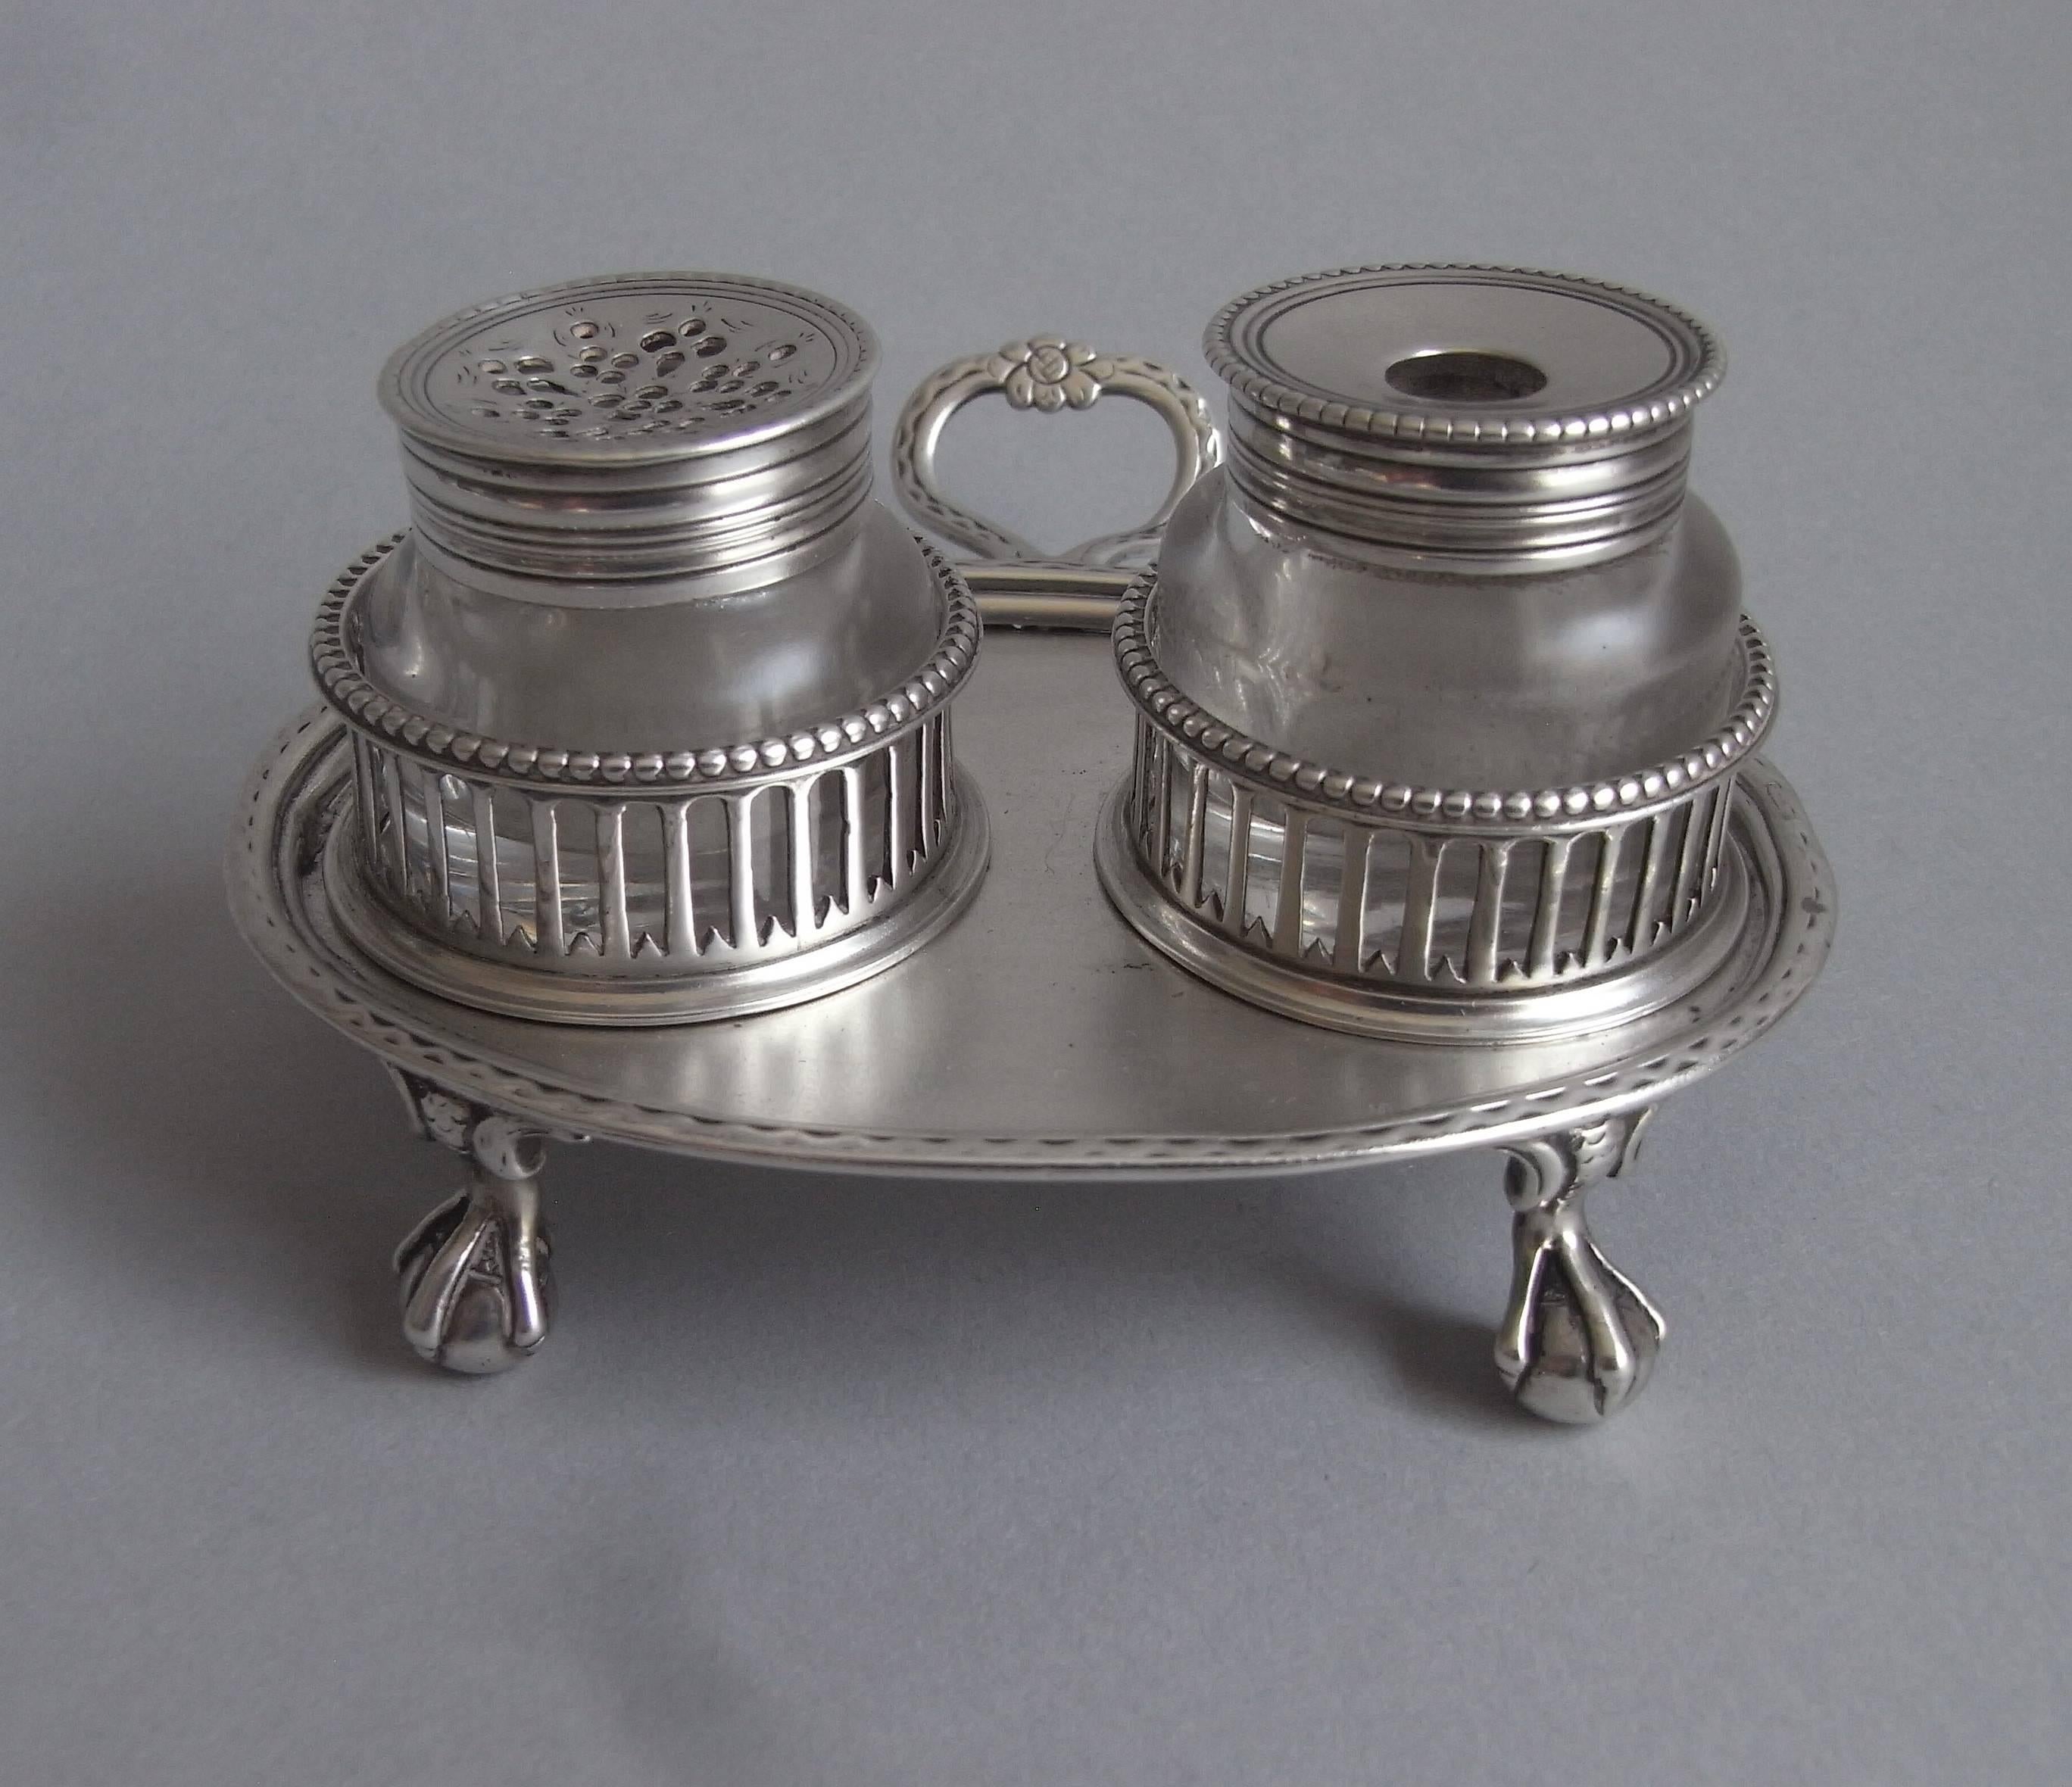 English An extremely rare George III Lady's Inkstand made by Burrage Davenport.